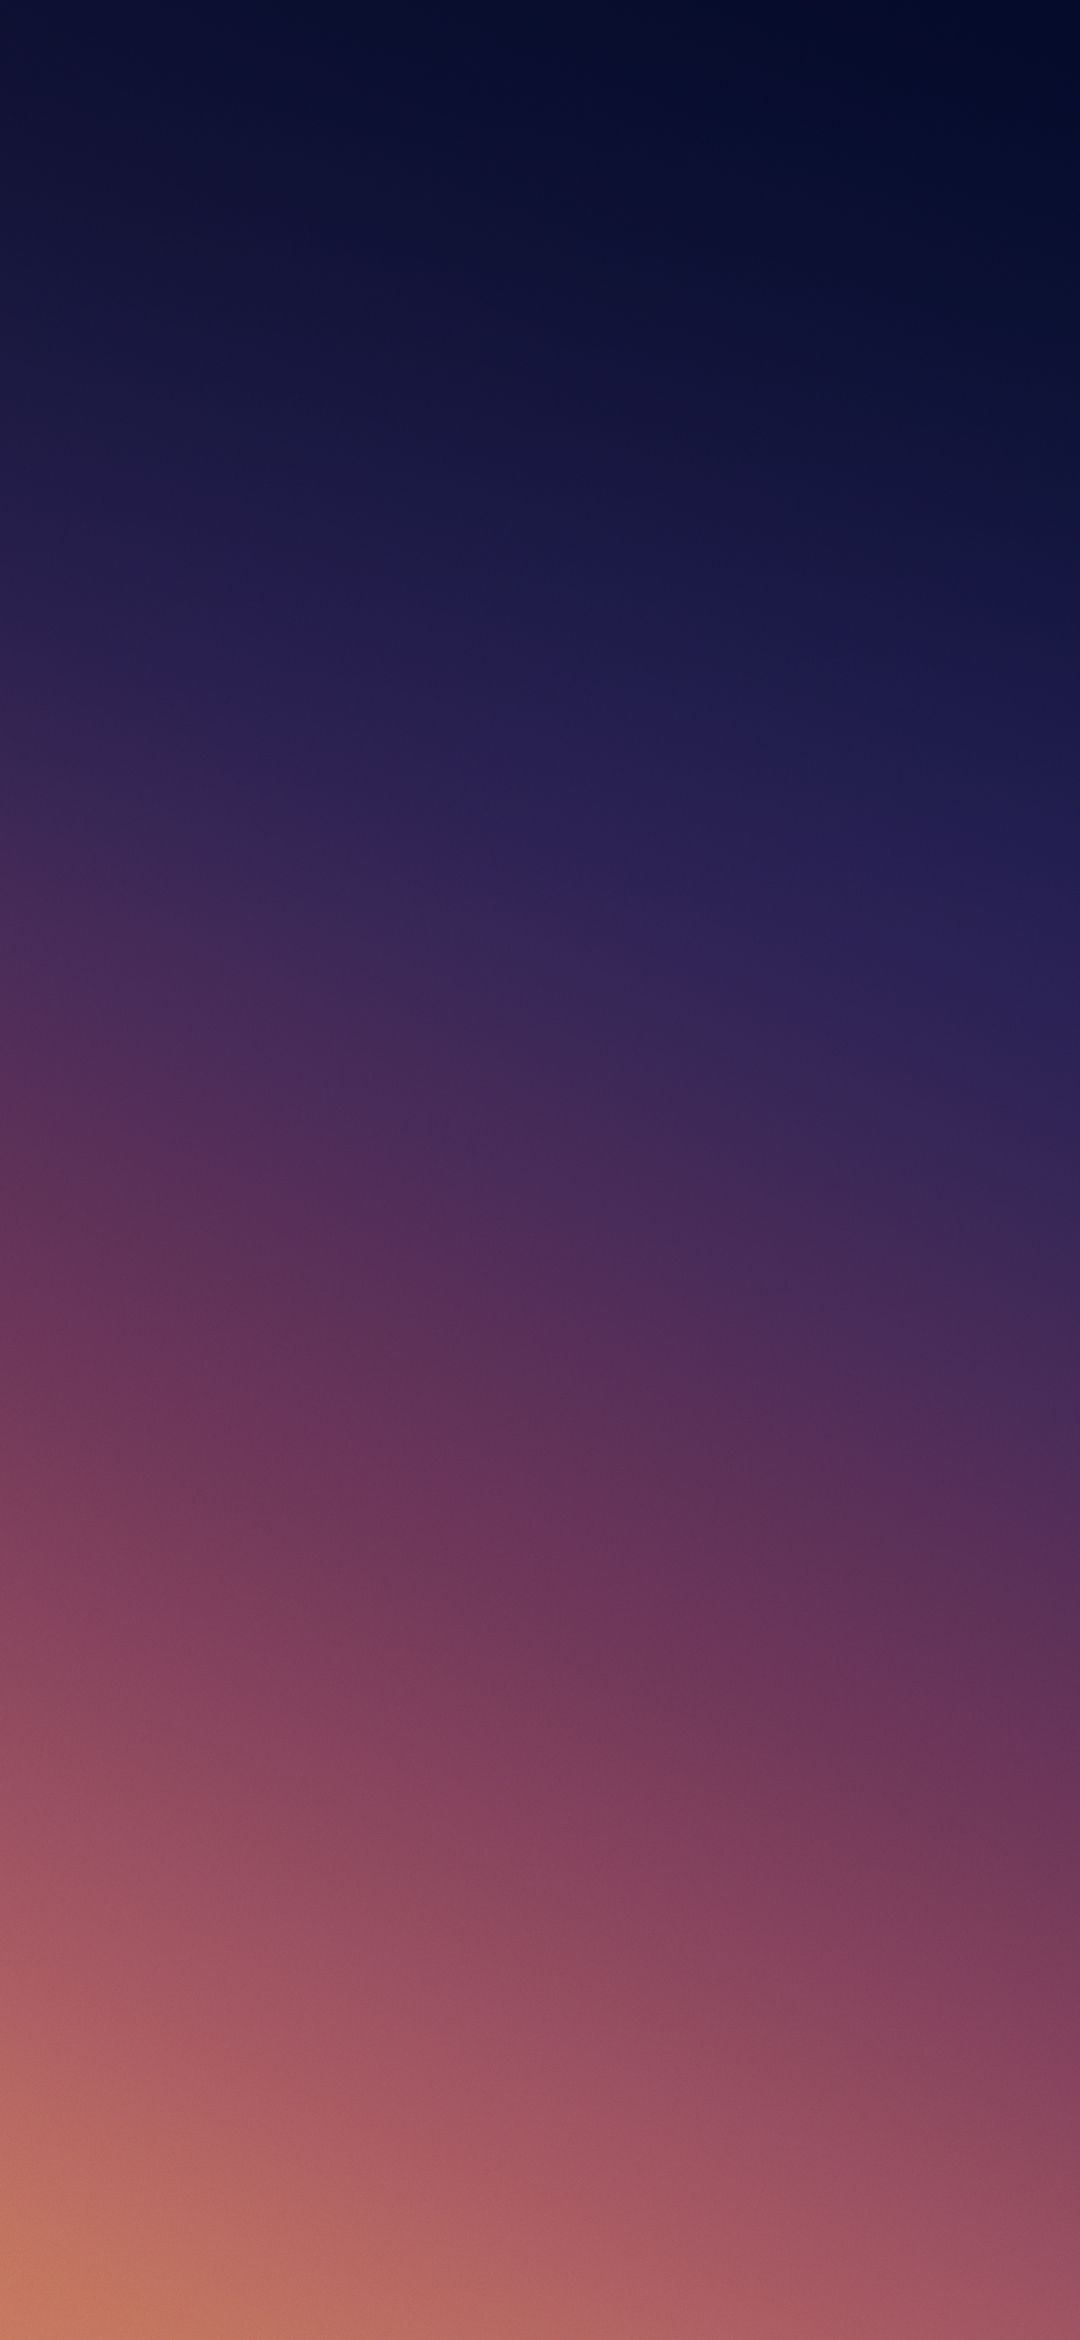 Free download Redmi Note 7 Official Wallpaper in FHD resolution try on your [1080x2340] for your Desktop, Mobile & Tablet. Explore Redmi Note 7 Wallpaper. Redmi Note 7 Wallpaper